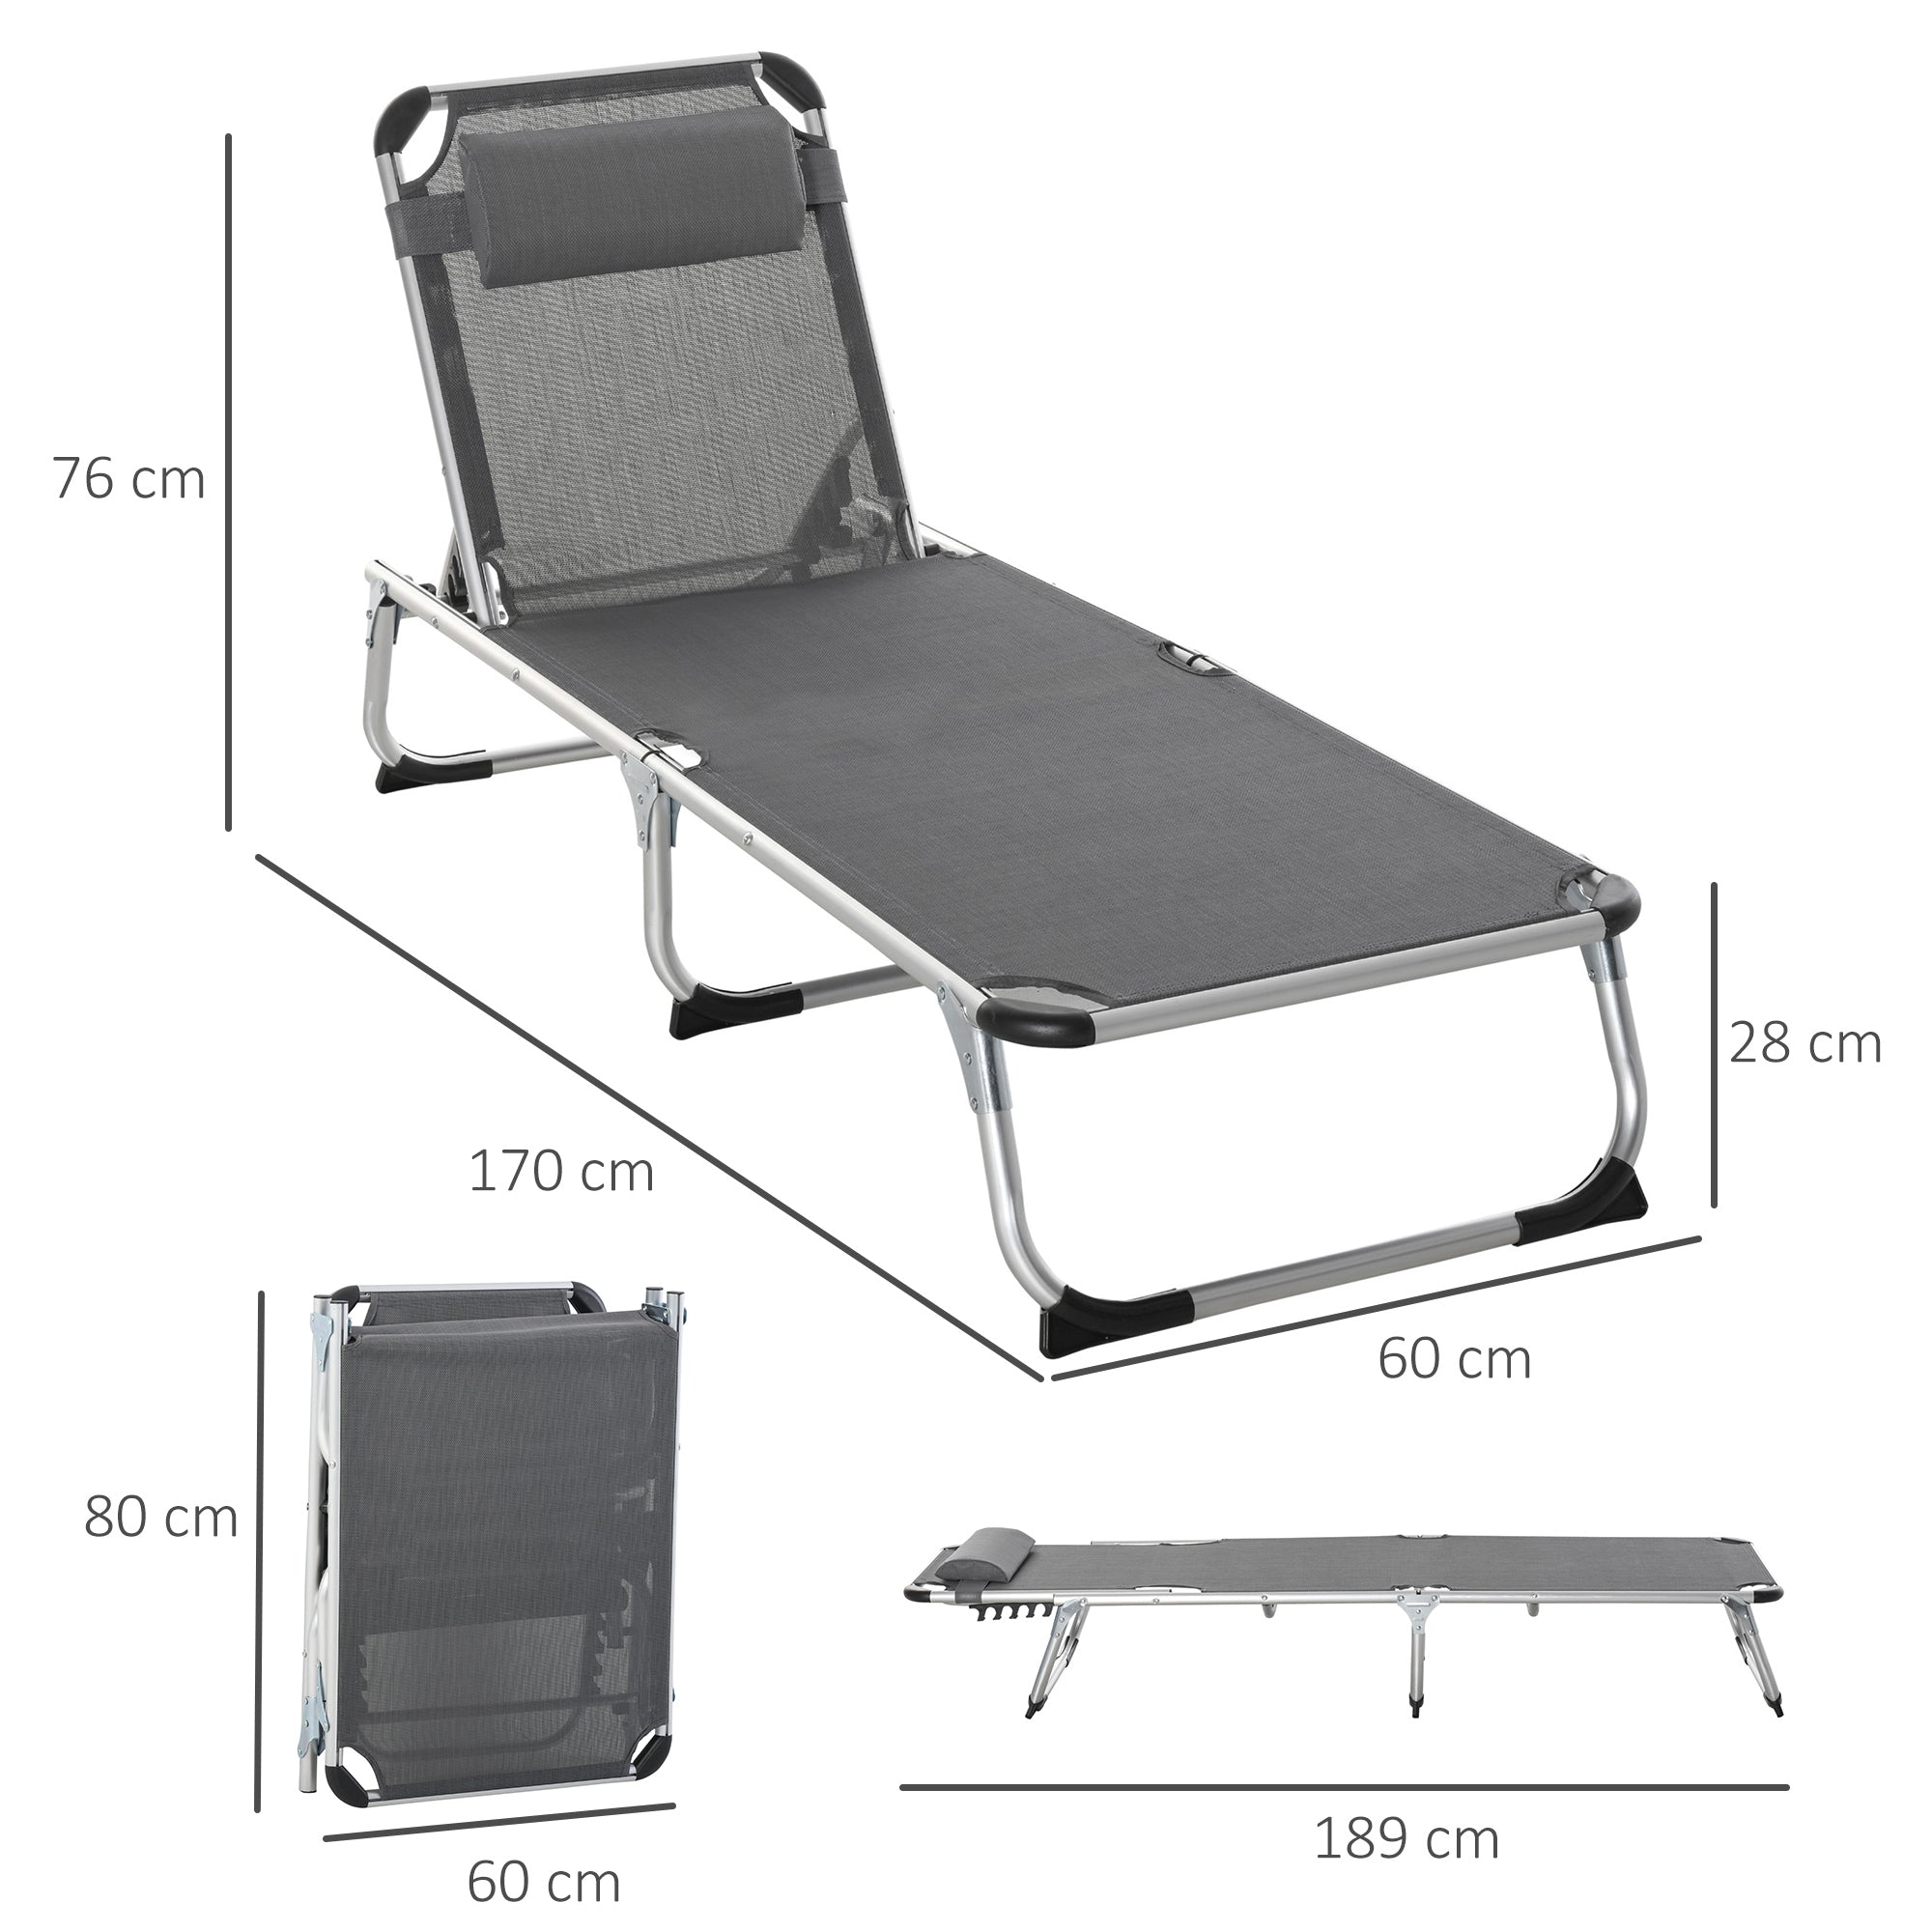 2 Pieces Foldable Sun Lounger with Pillow, 5-Level Adjustable Reclining Lounge Chair, Aluminium Frame Camping Bed Cot, Grey-2